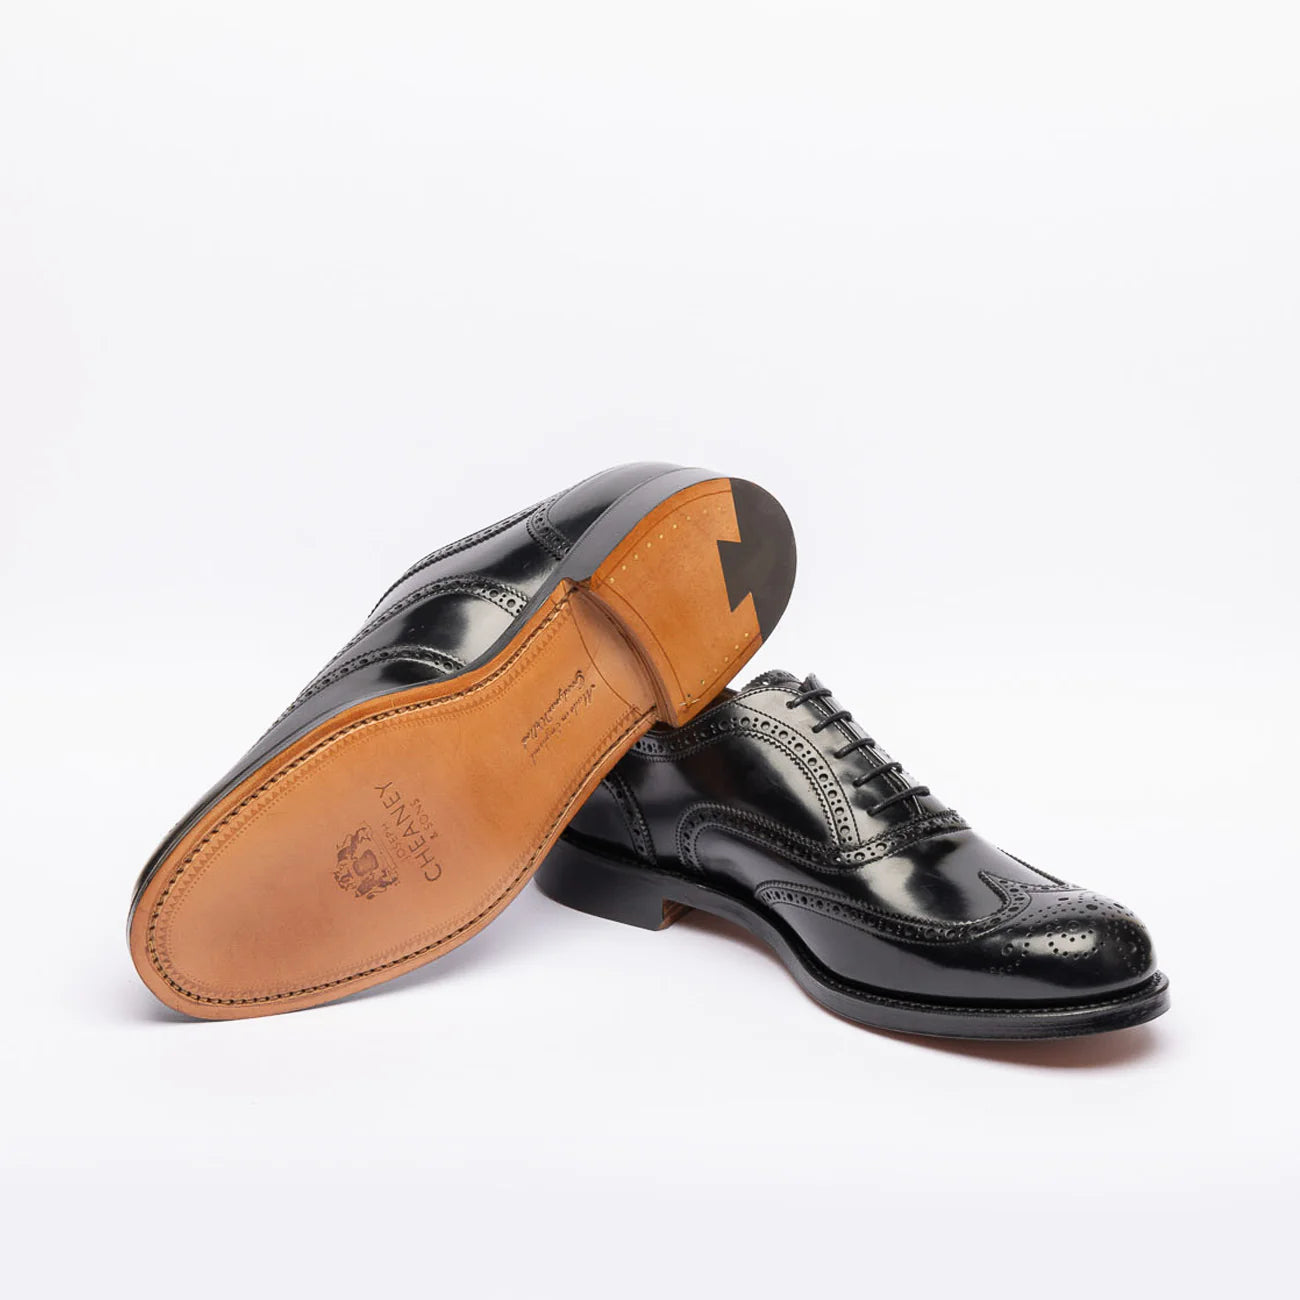 Cheaney Arthur III lace-up shoe in black leather